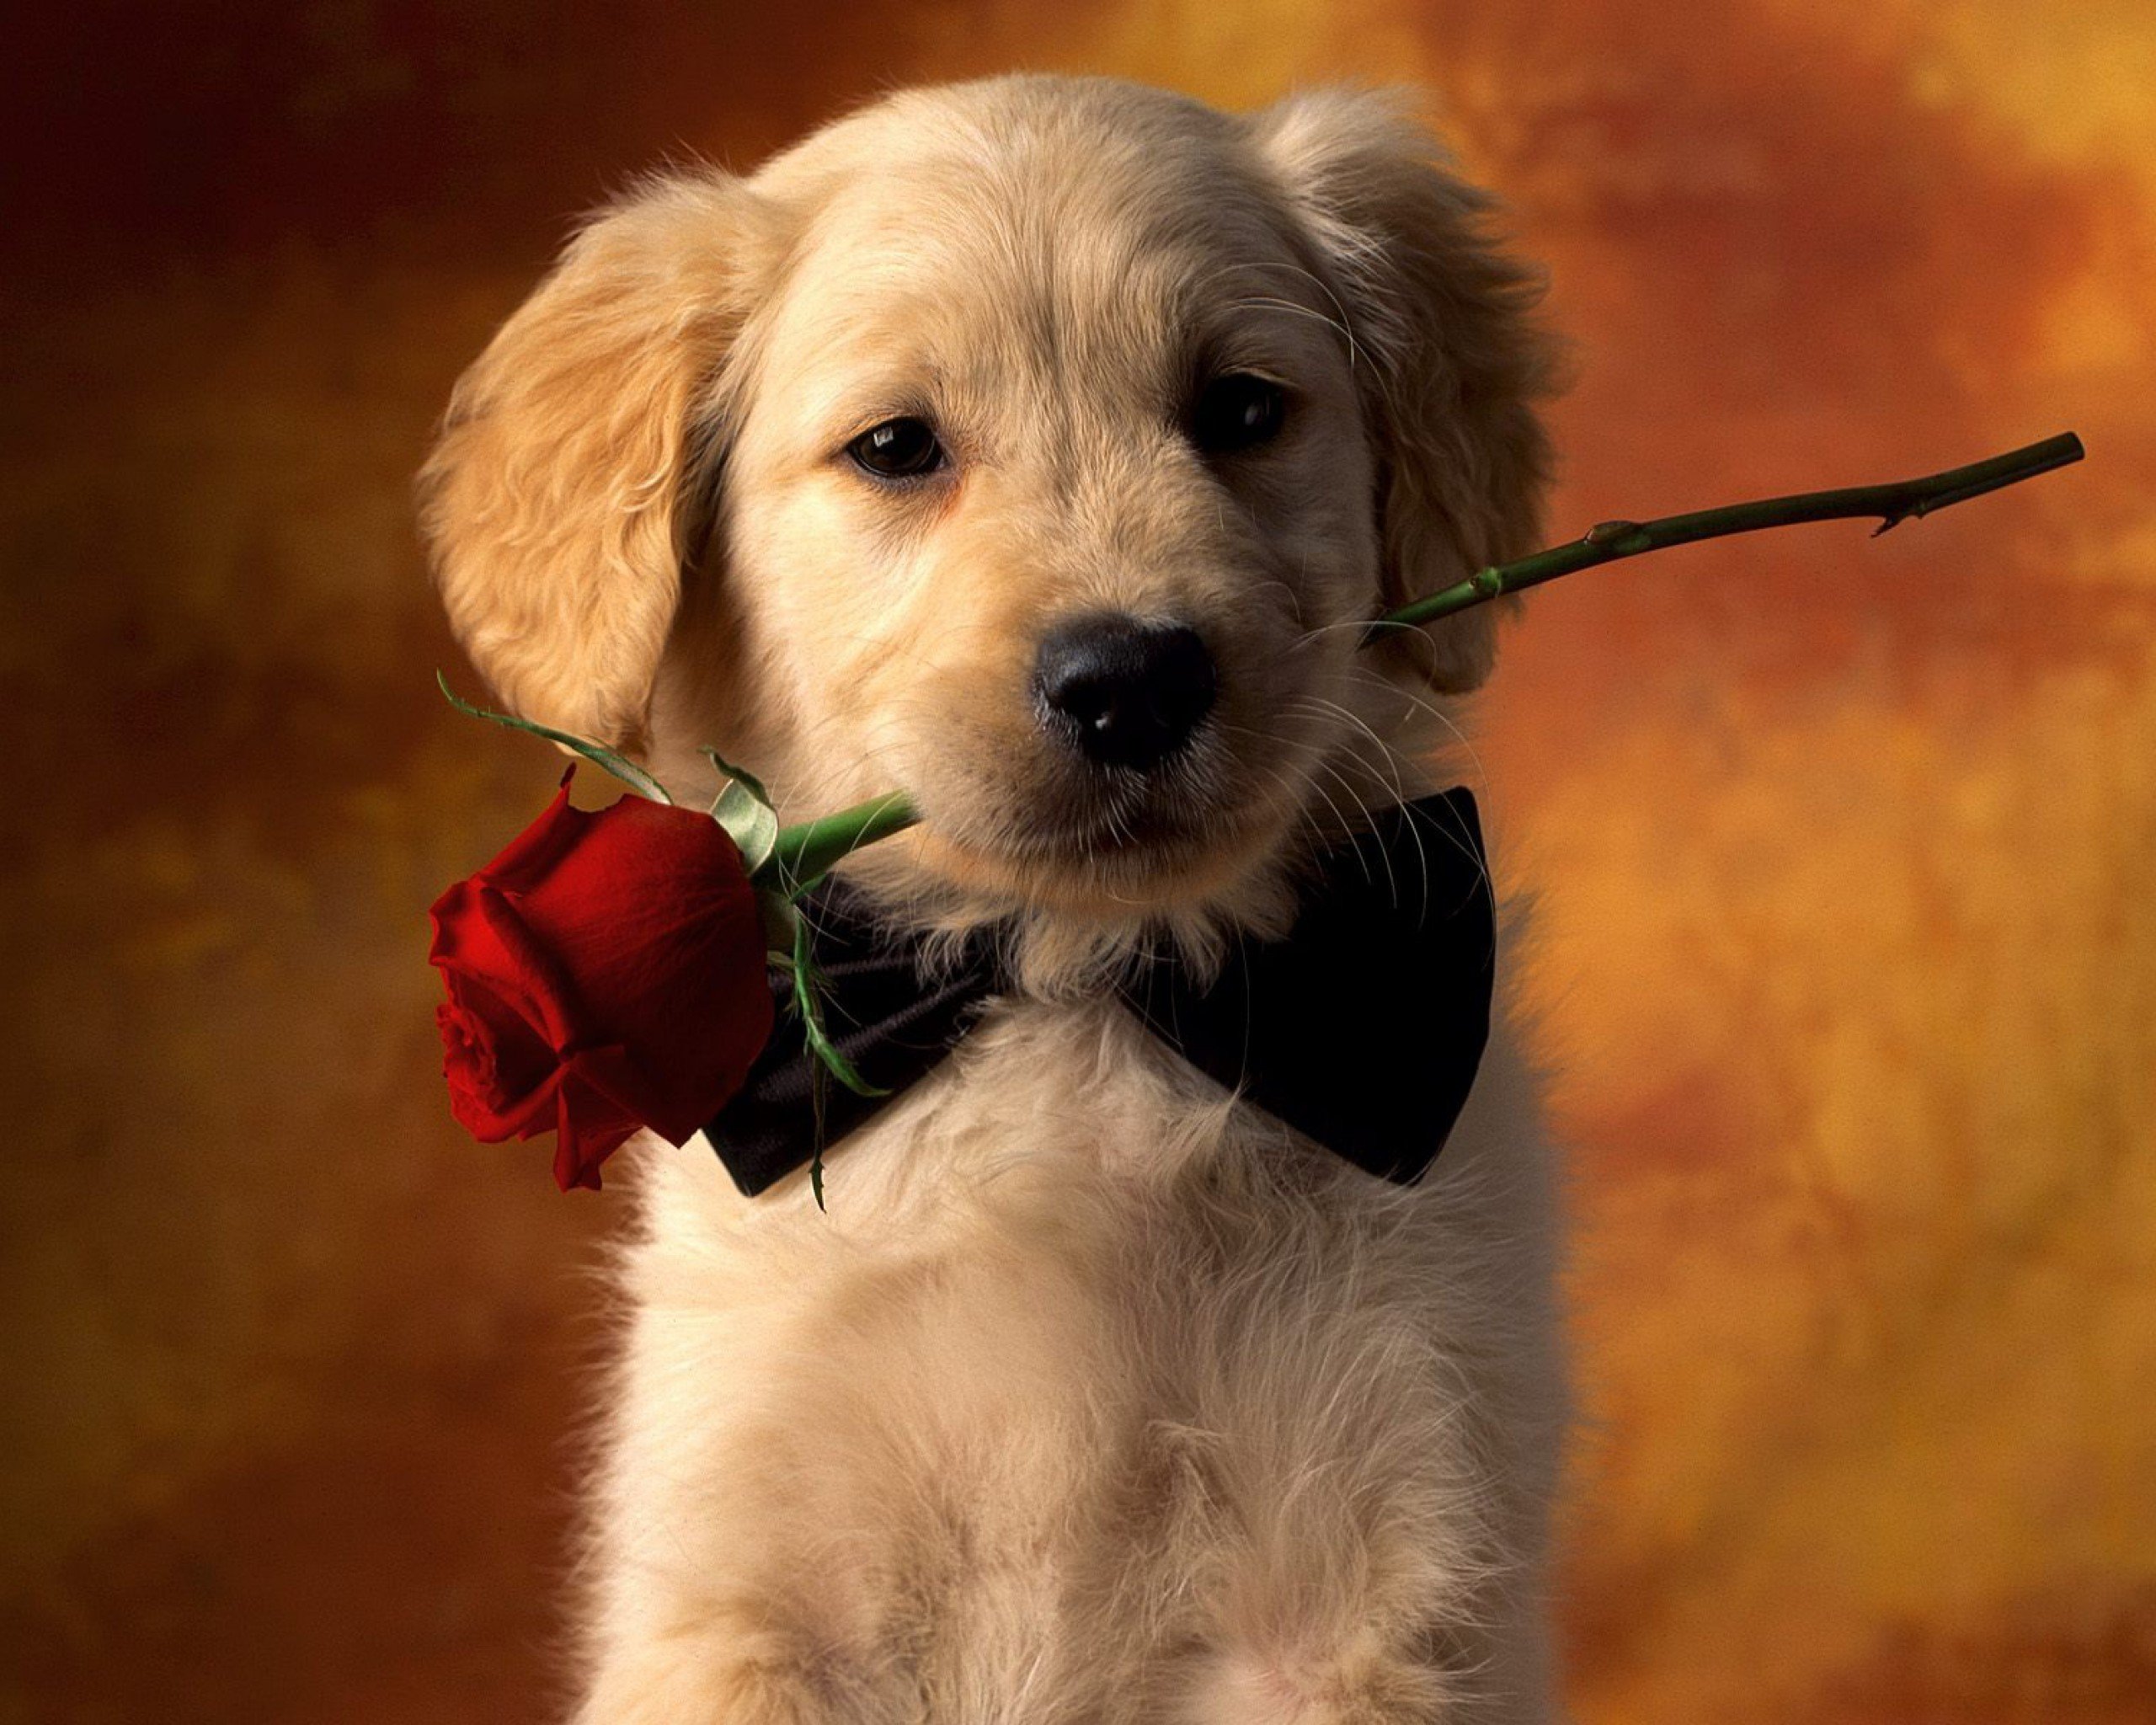 dogs, puppy, animal, cute, golden retriever, red rose